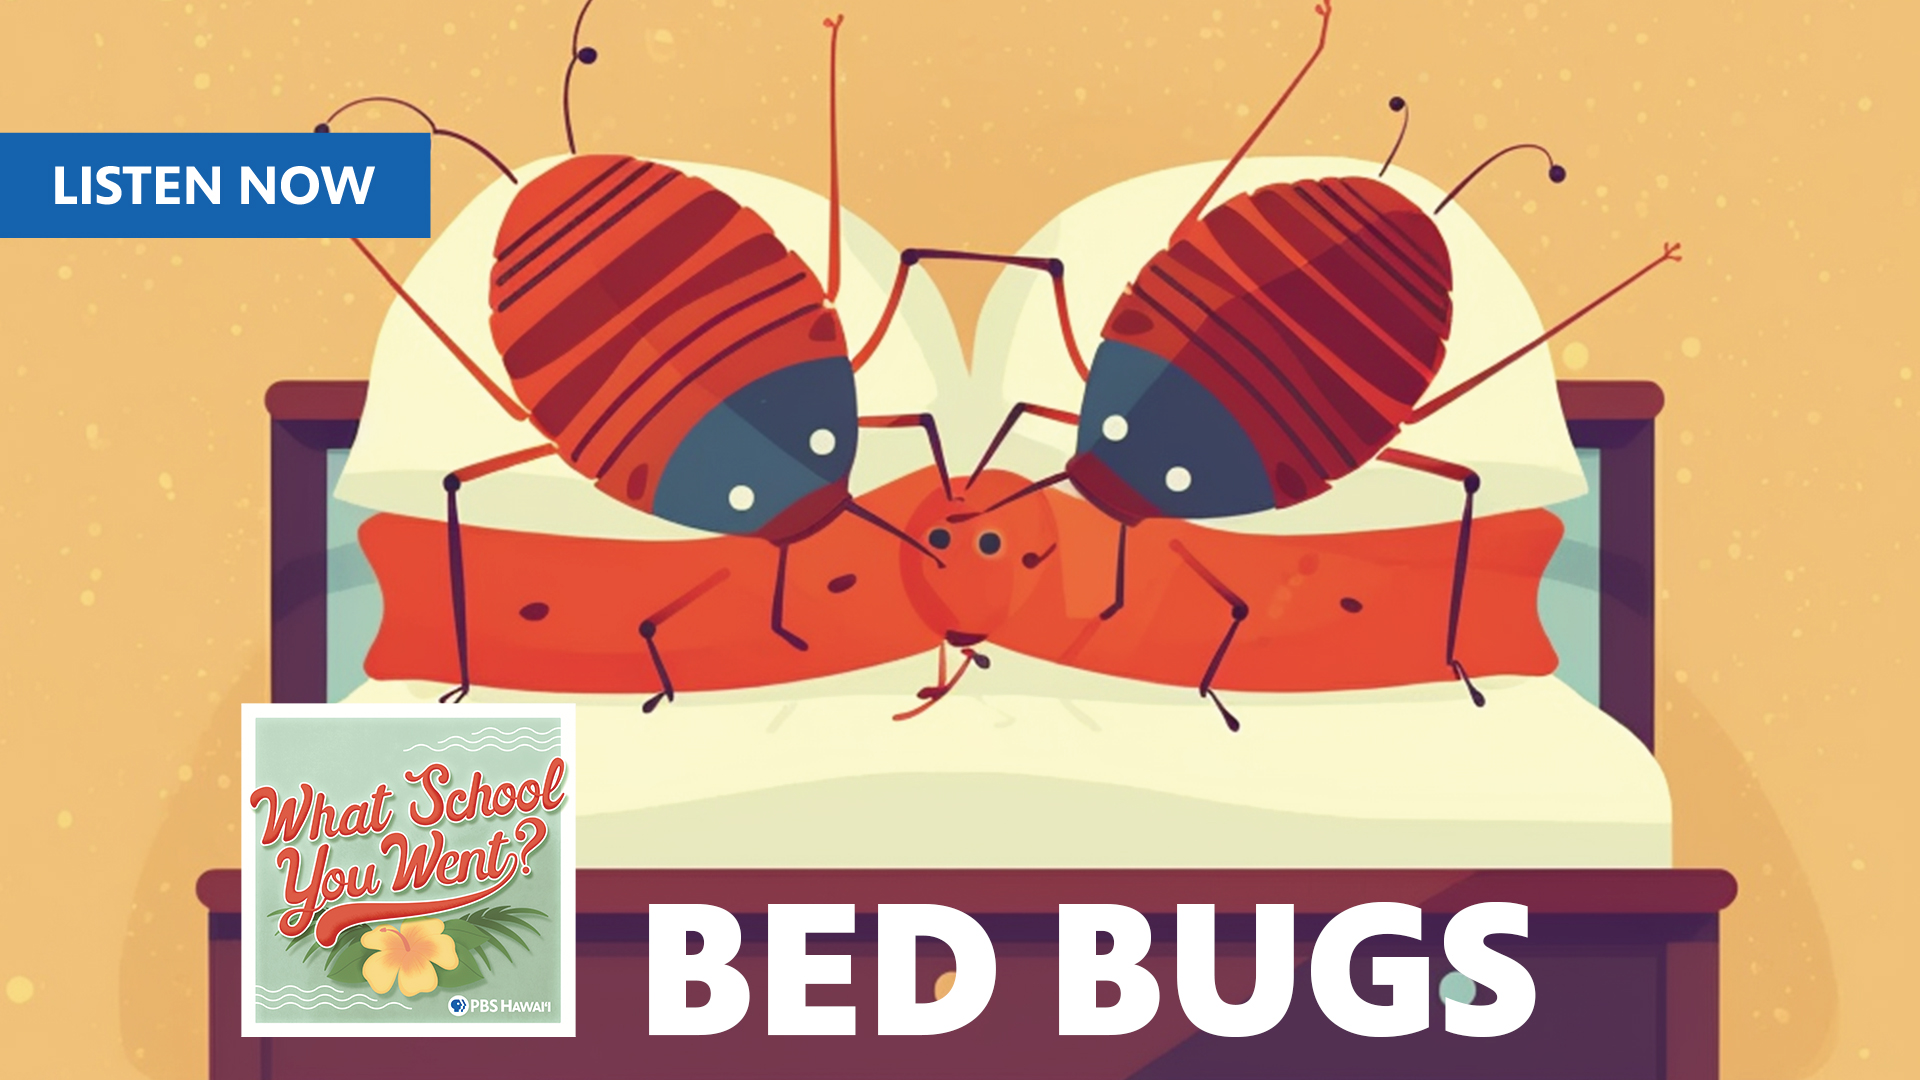 What School You Went? <br/>Bed Bugs